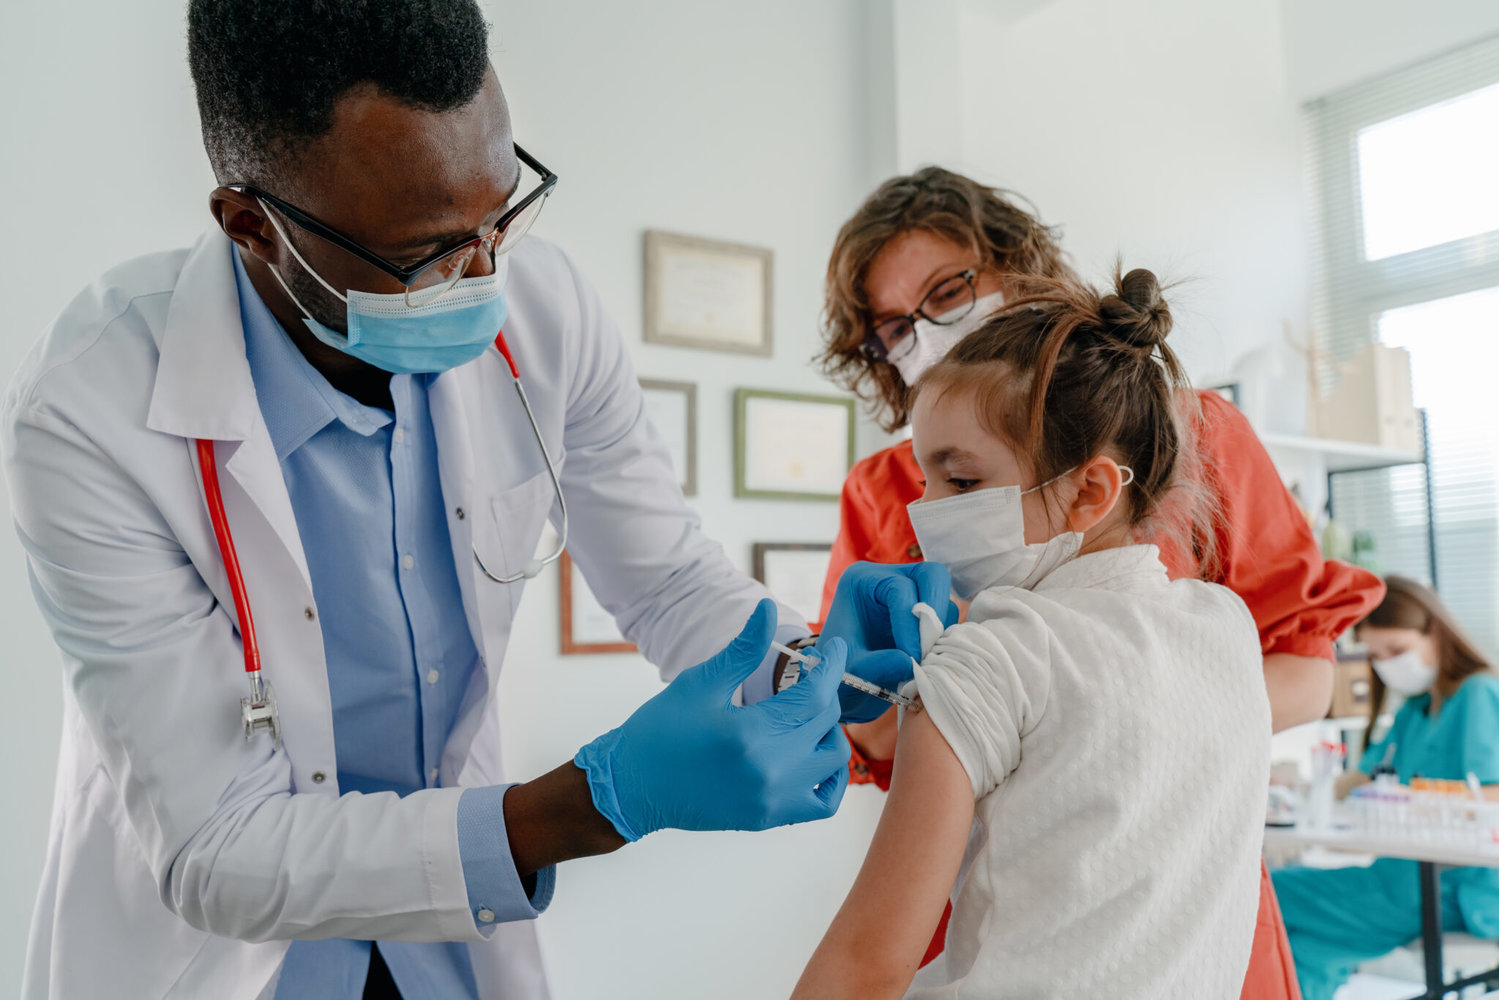 The Orange County School District will begin operating vaccine clinics this week at high schools, for children aged 5 to 11, according to its website. Parents or guardians must be at the clinics and sign a consent form. 